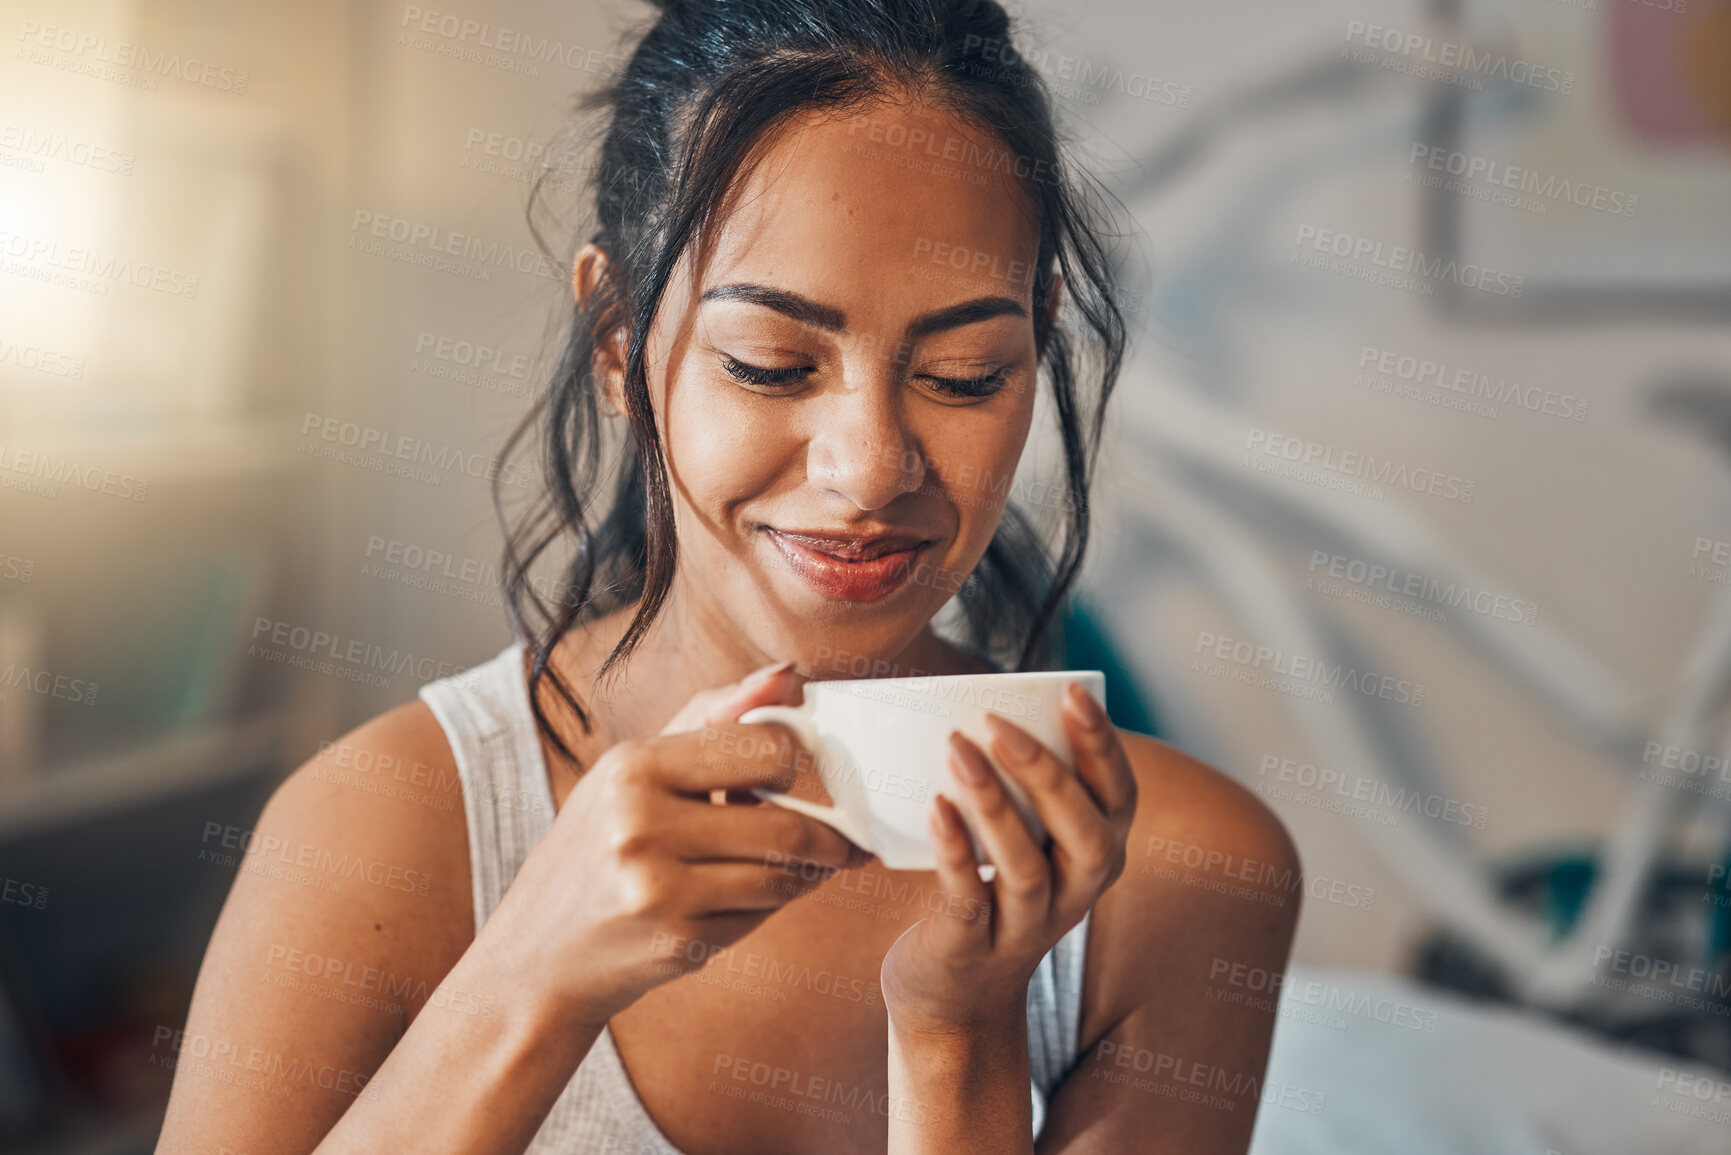 Buy stock photo A beautiful young Hispanic woman enjoying a warm cup of coffee for breakfast. One mixed race female drinking tea while sitting in bed and daydreaming